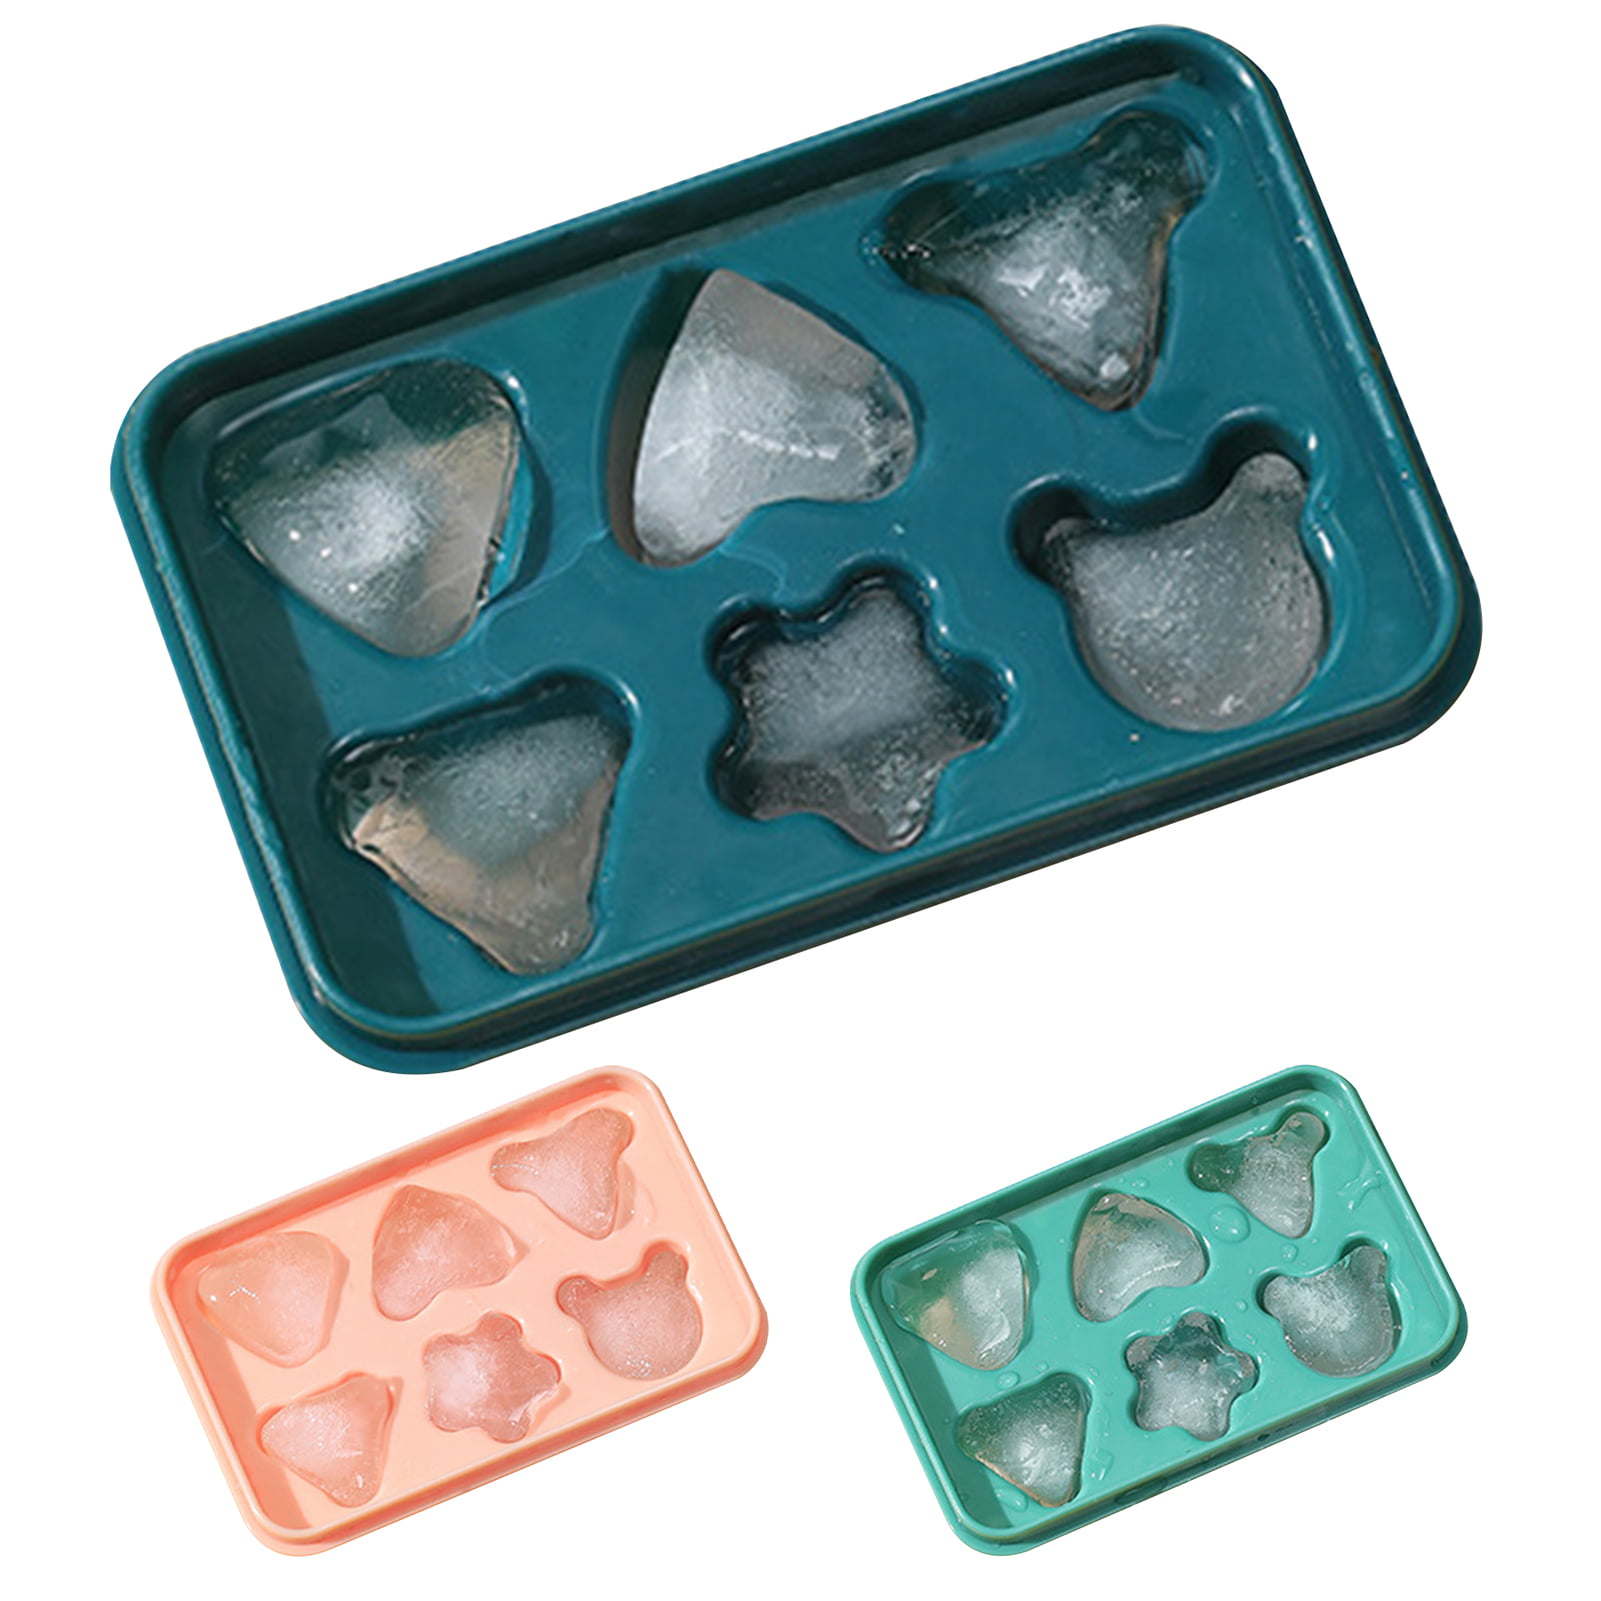 Travelwant 3Pcs Ice Cube Trays with 6 Cavities, Ice Cube Mould with  Spill-Resistant Removable Lids ,Stackable Easy Release,Best Ice Trays for  Freezer, Whiskey, Cocktail-4.96inx2.95inx1.46in 